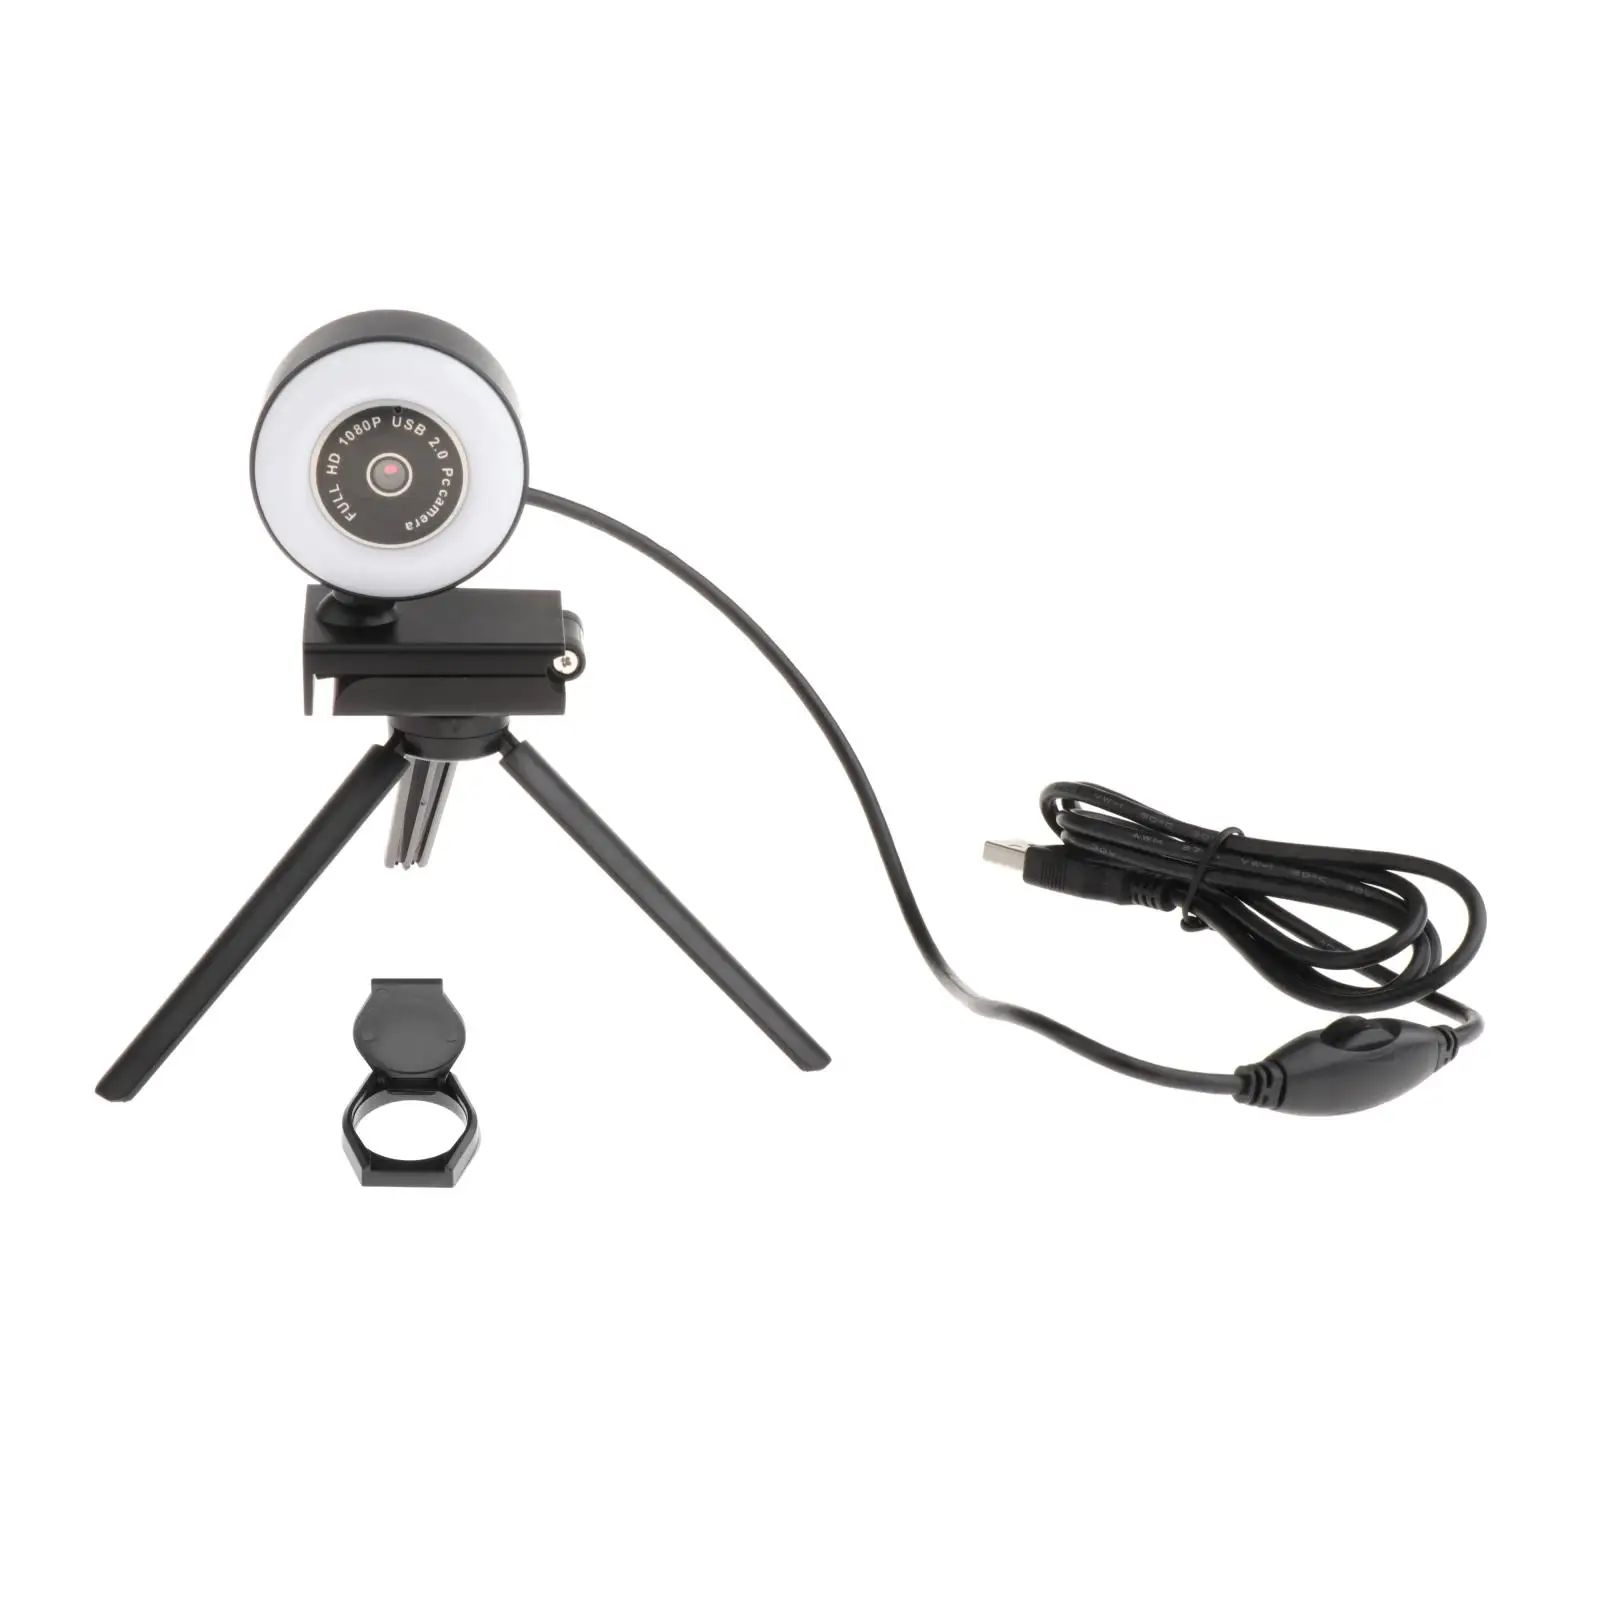 HD USB Webcam for Desktop Laptop Video Record with Microphone   Light